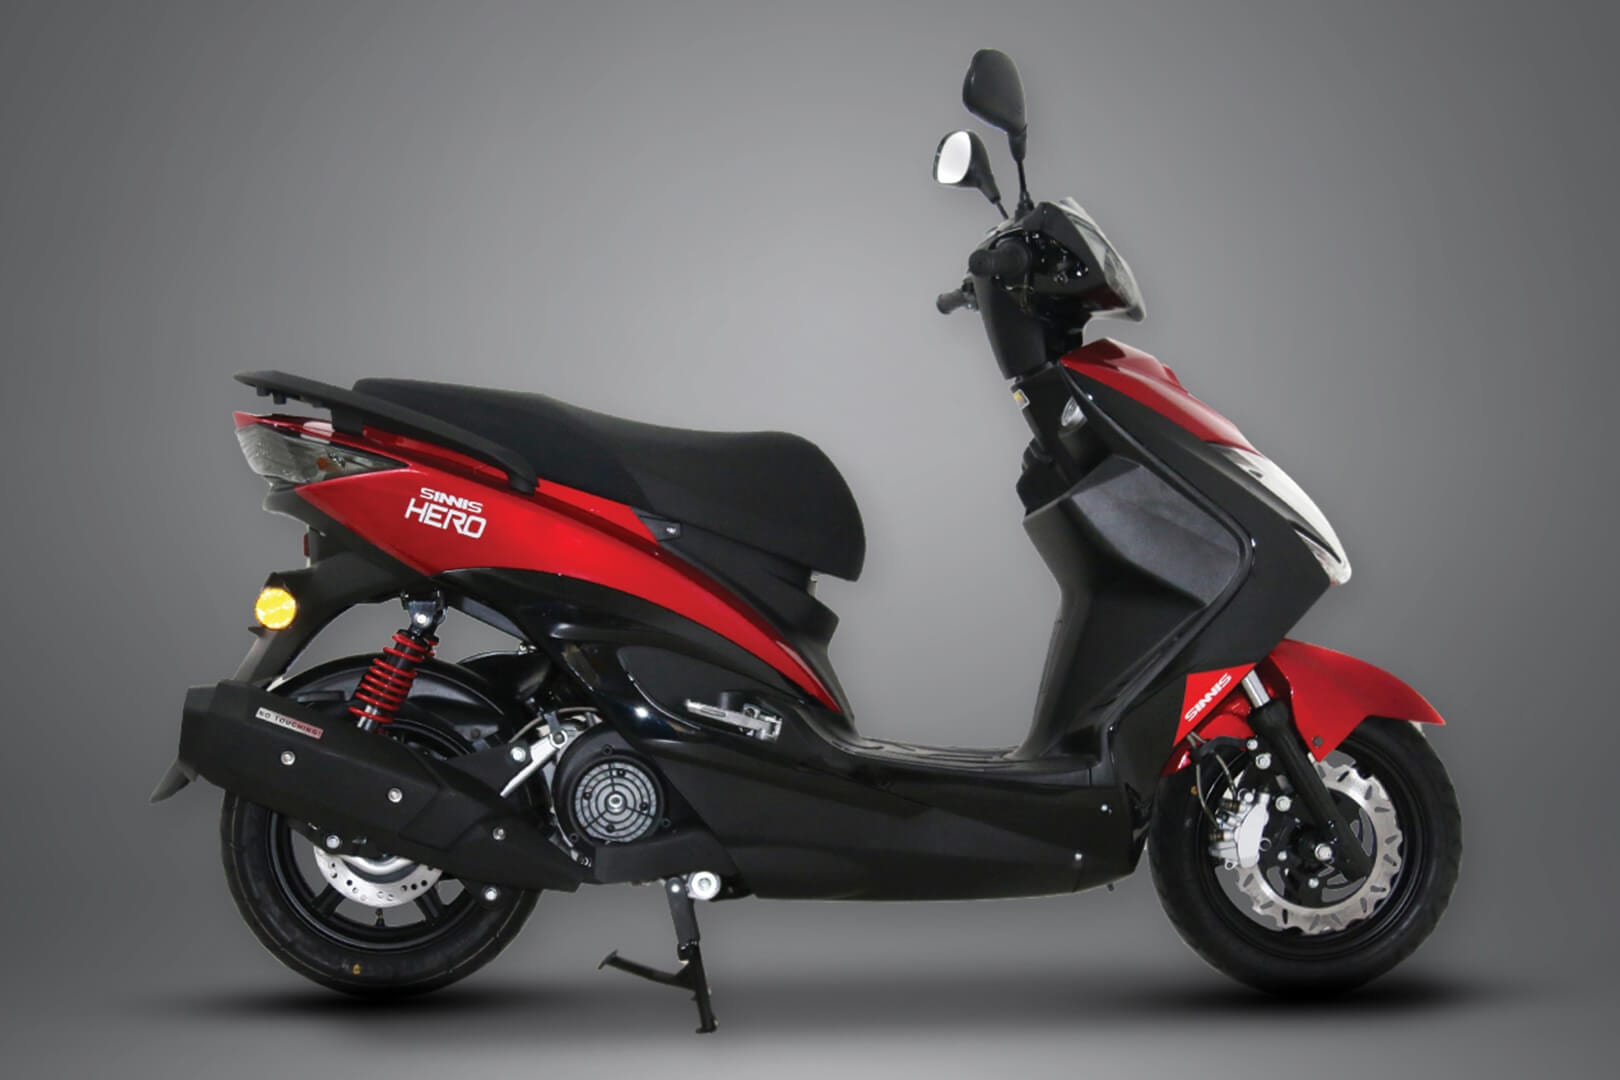 Sinnis Black and red hero 125cc scooter studio image